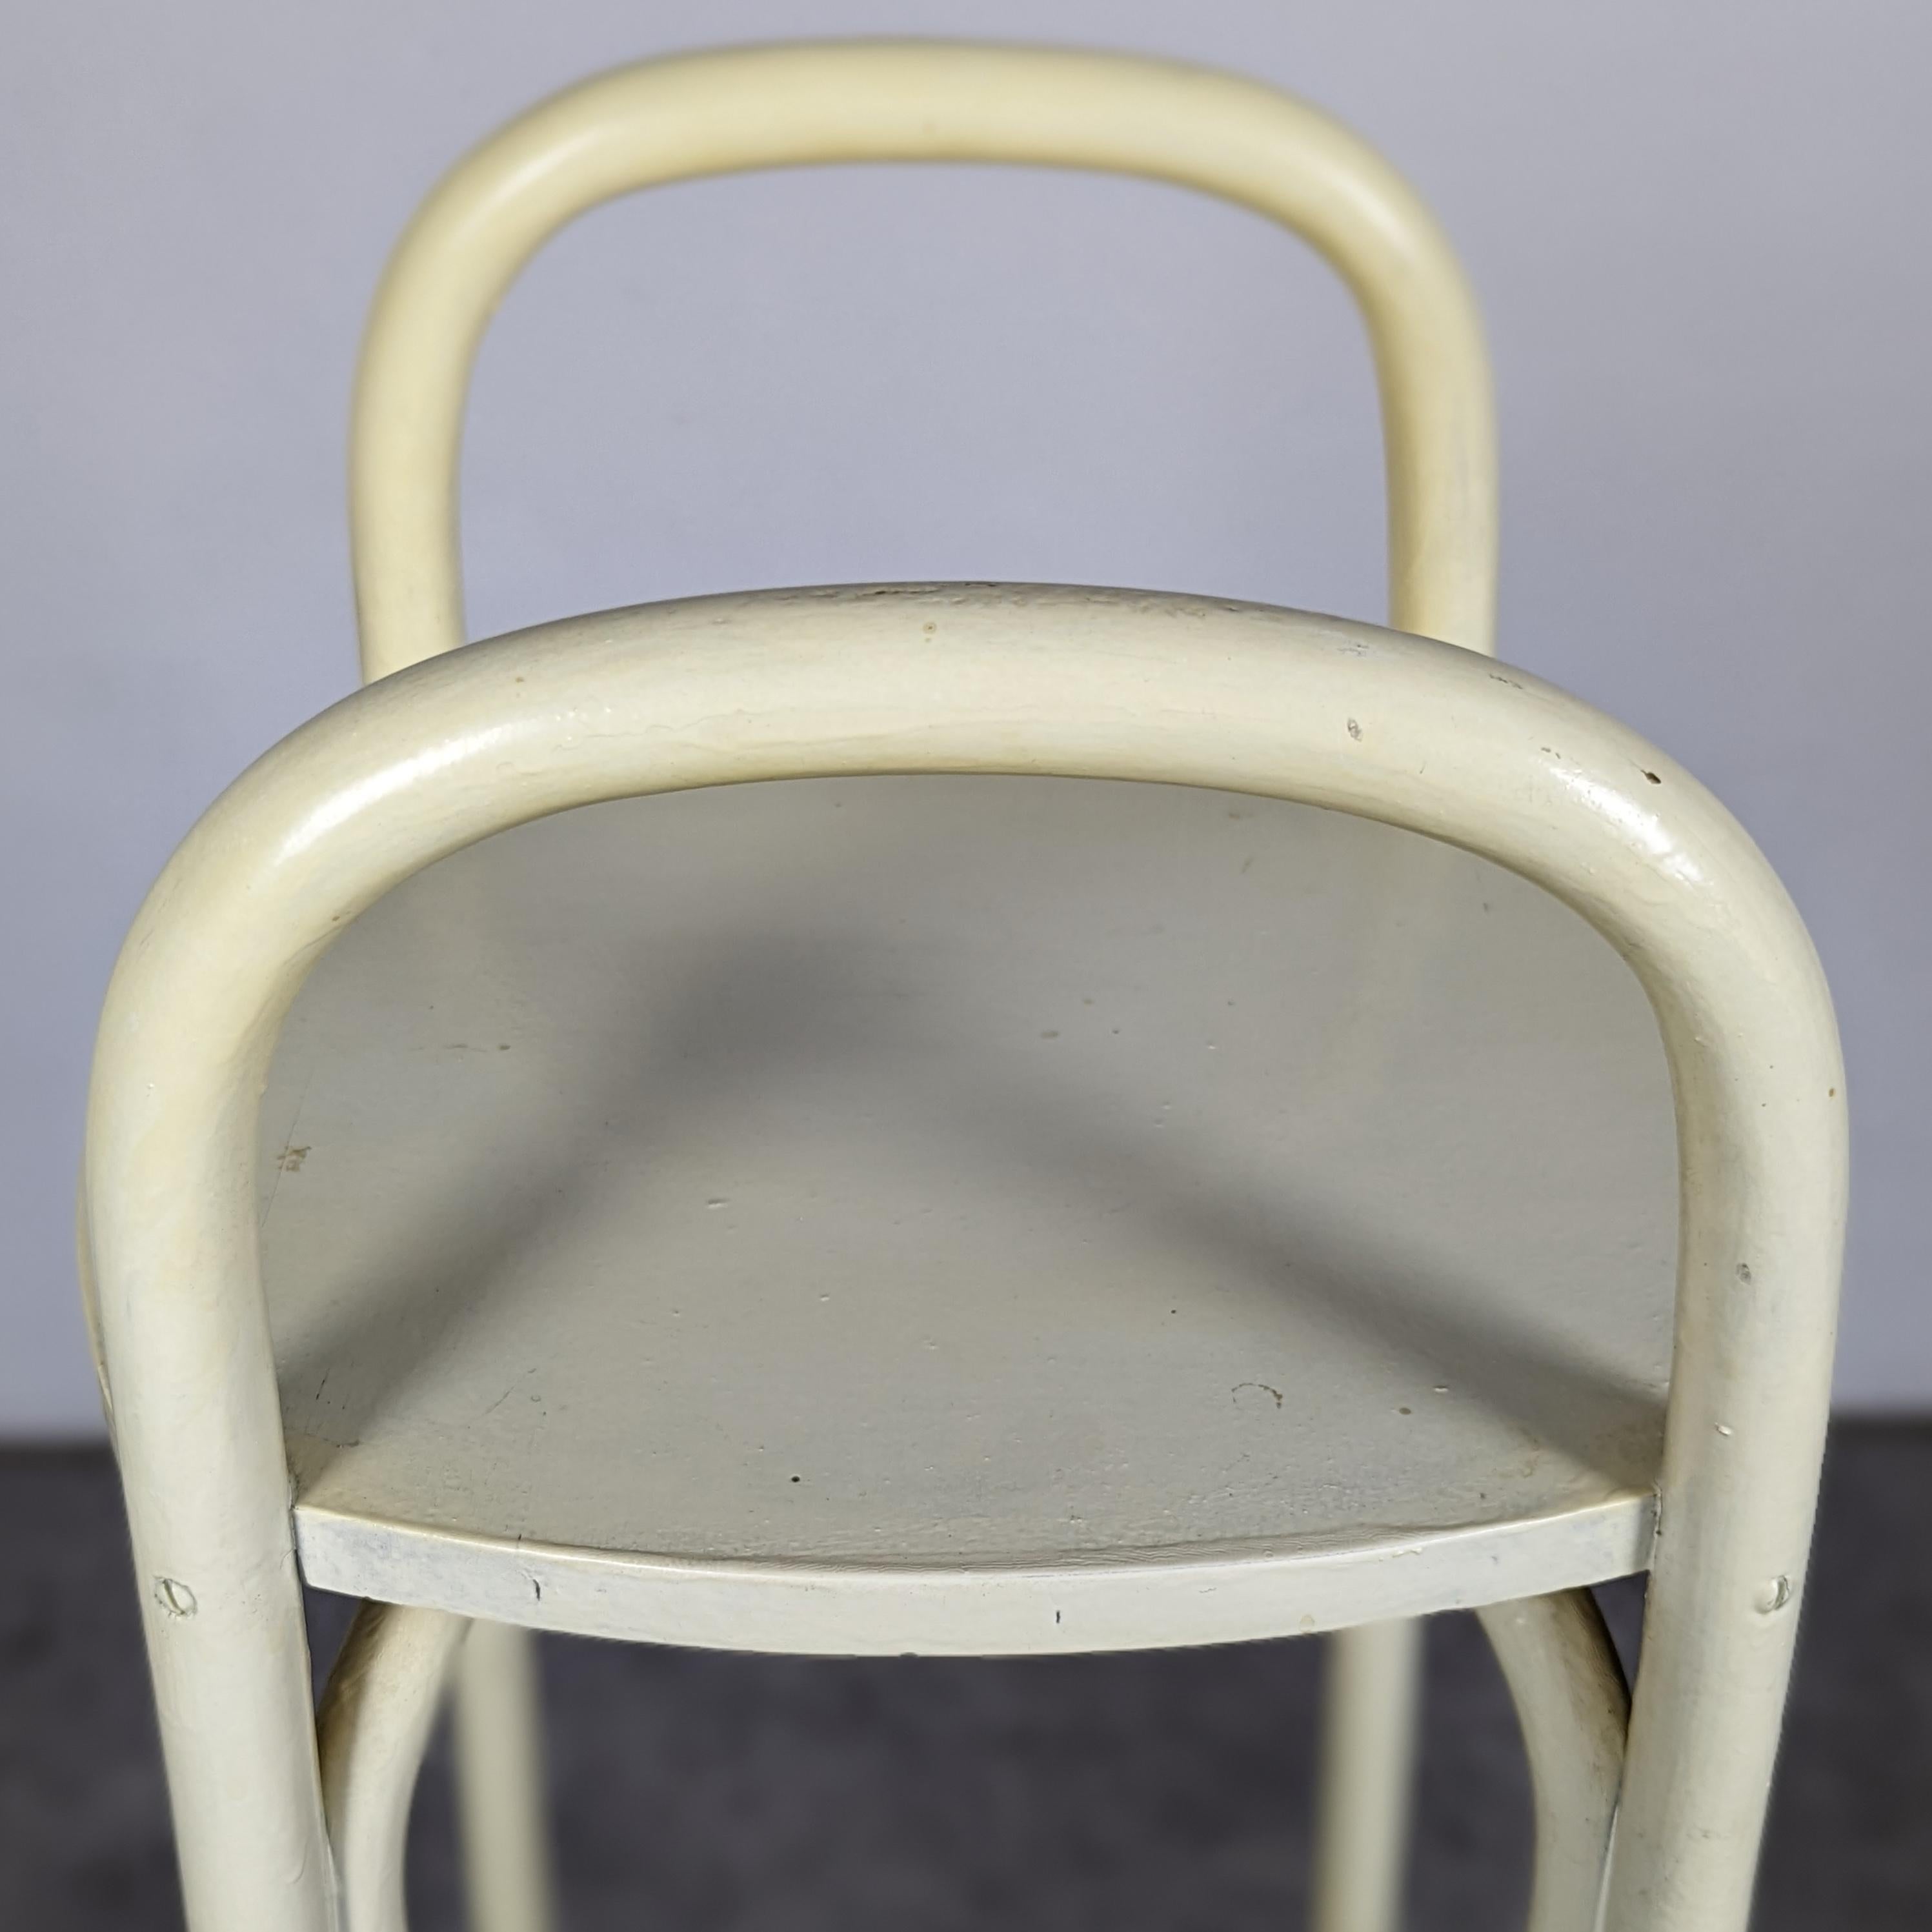 Beech Rare Thonet Nr. 21 plant stand by Josef Hoffmann For Sale